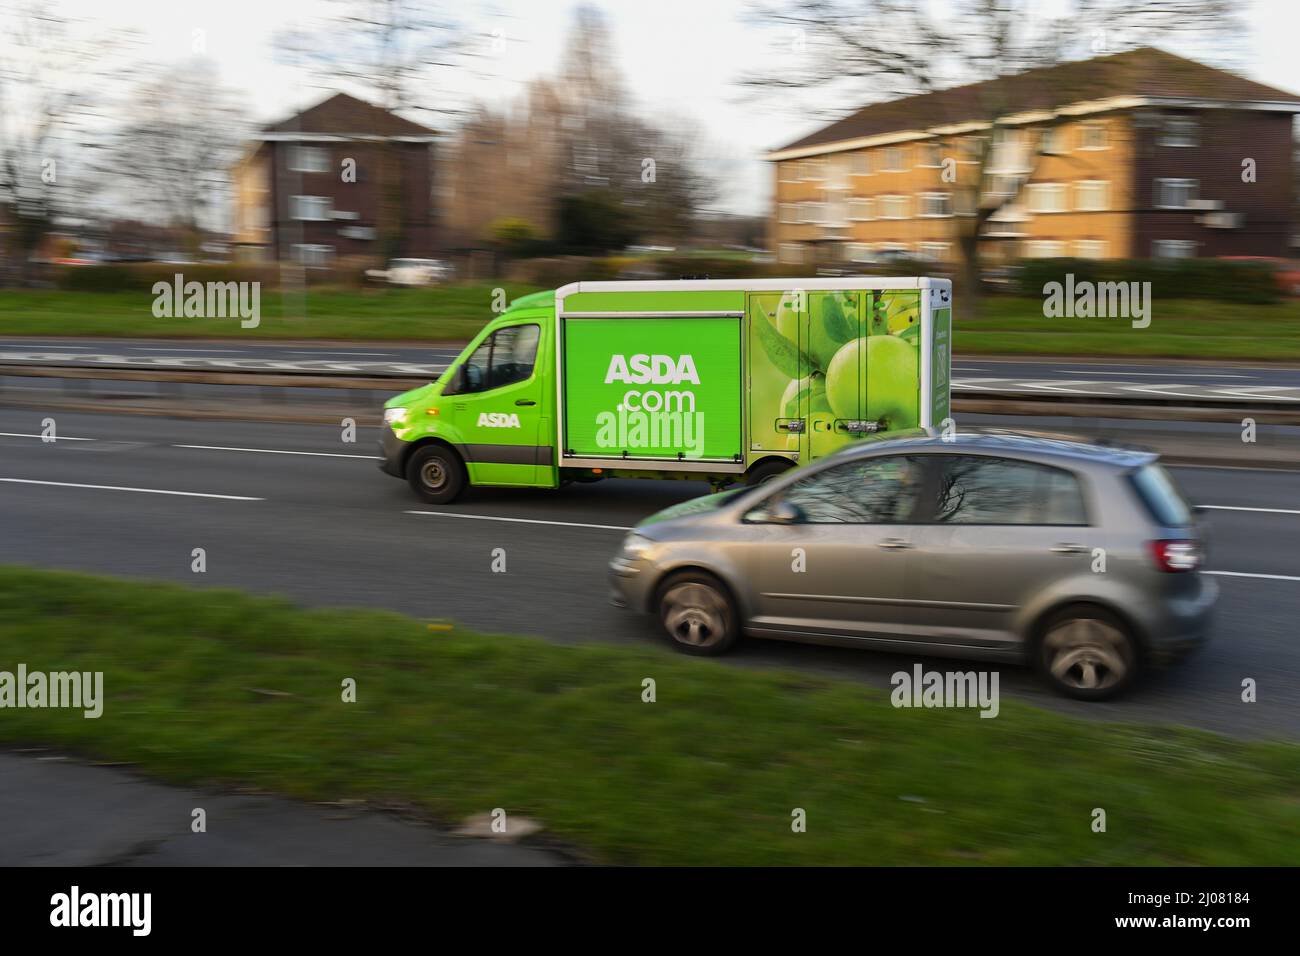 Asda online home food shopping delivery van driving along a busy road in panning shot with copy space. Stock Photo